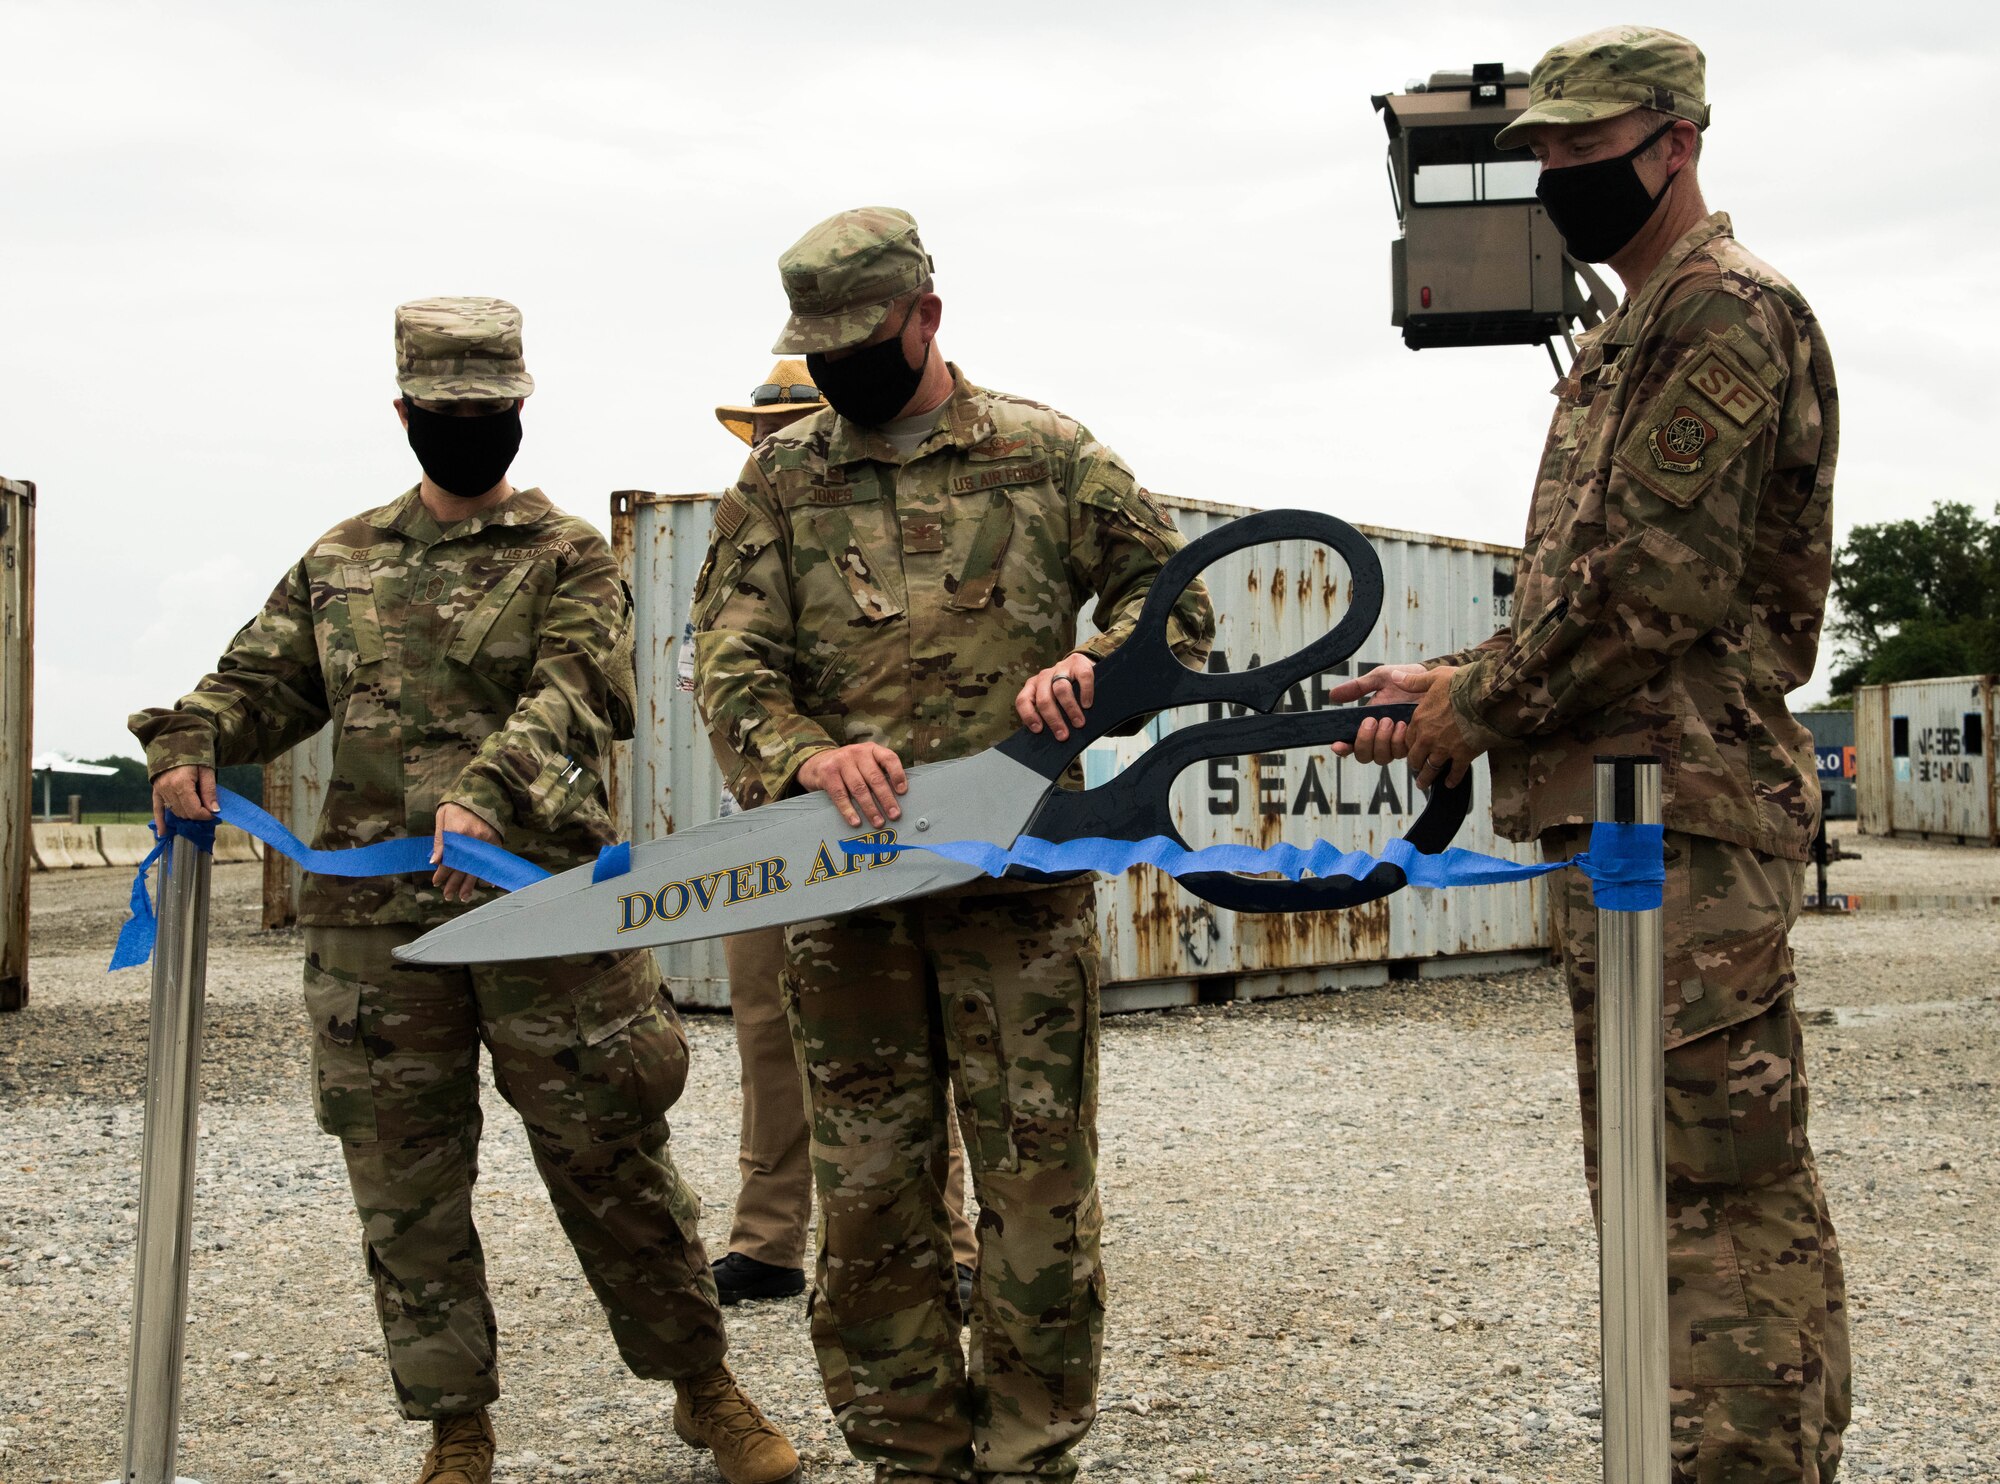 Team Dover held a ribbon-cutting ceremony for the Tactics and Leadership Nexus, a first-of-its-kind permanent integrated combat and leadership training facility on base, July 24, 2020.